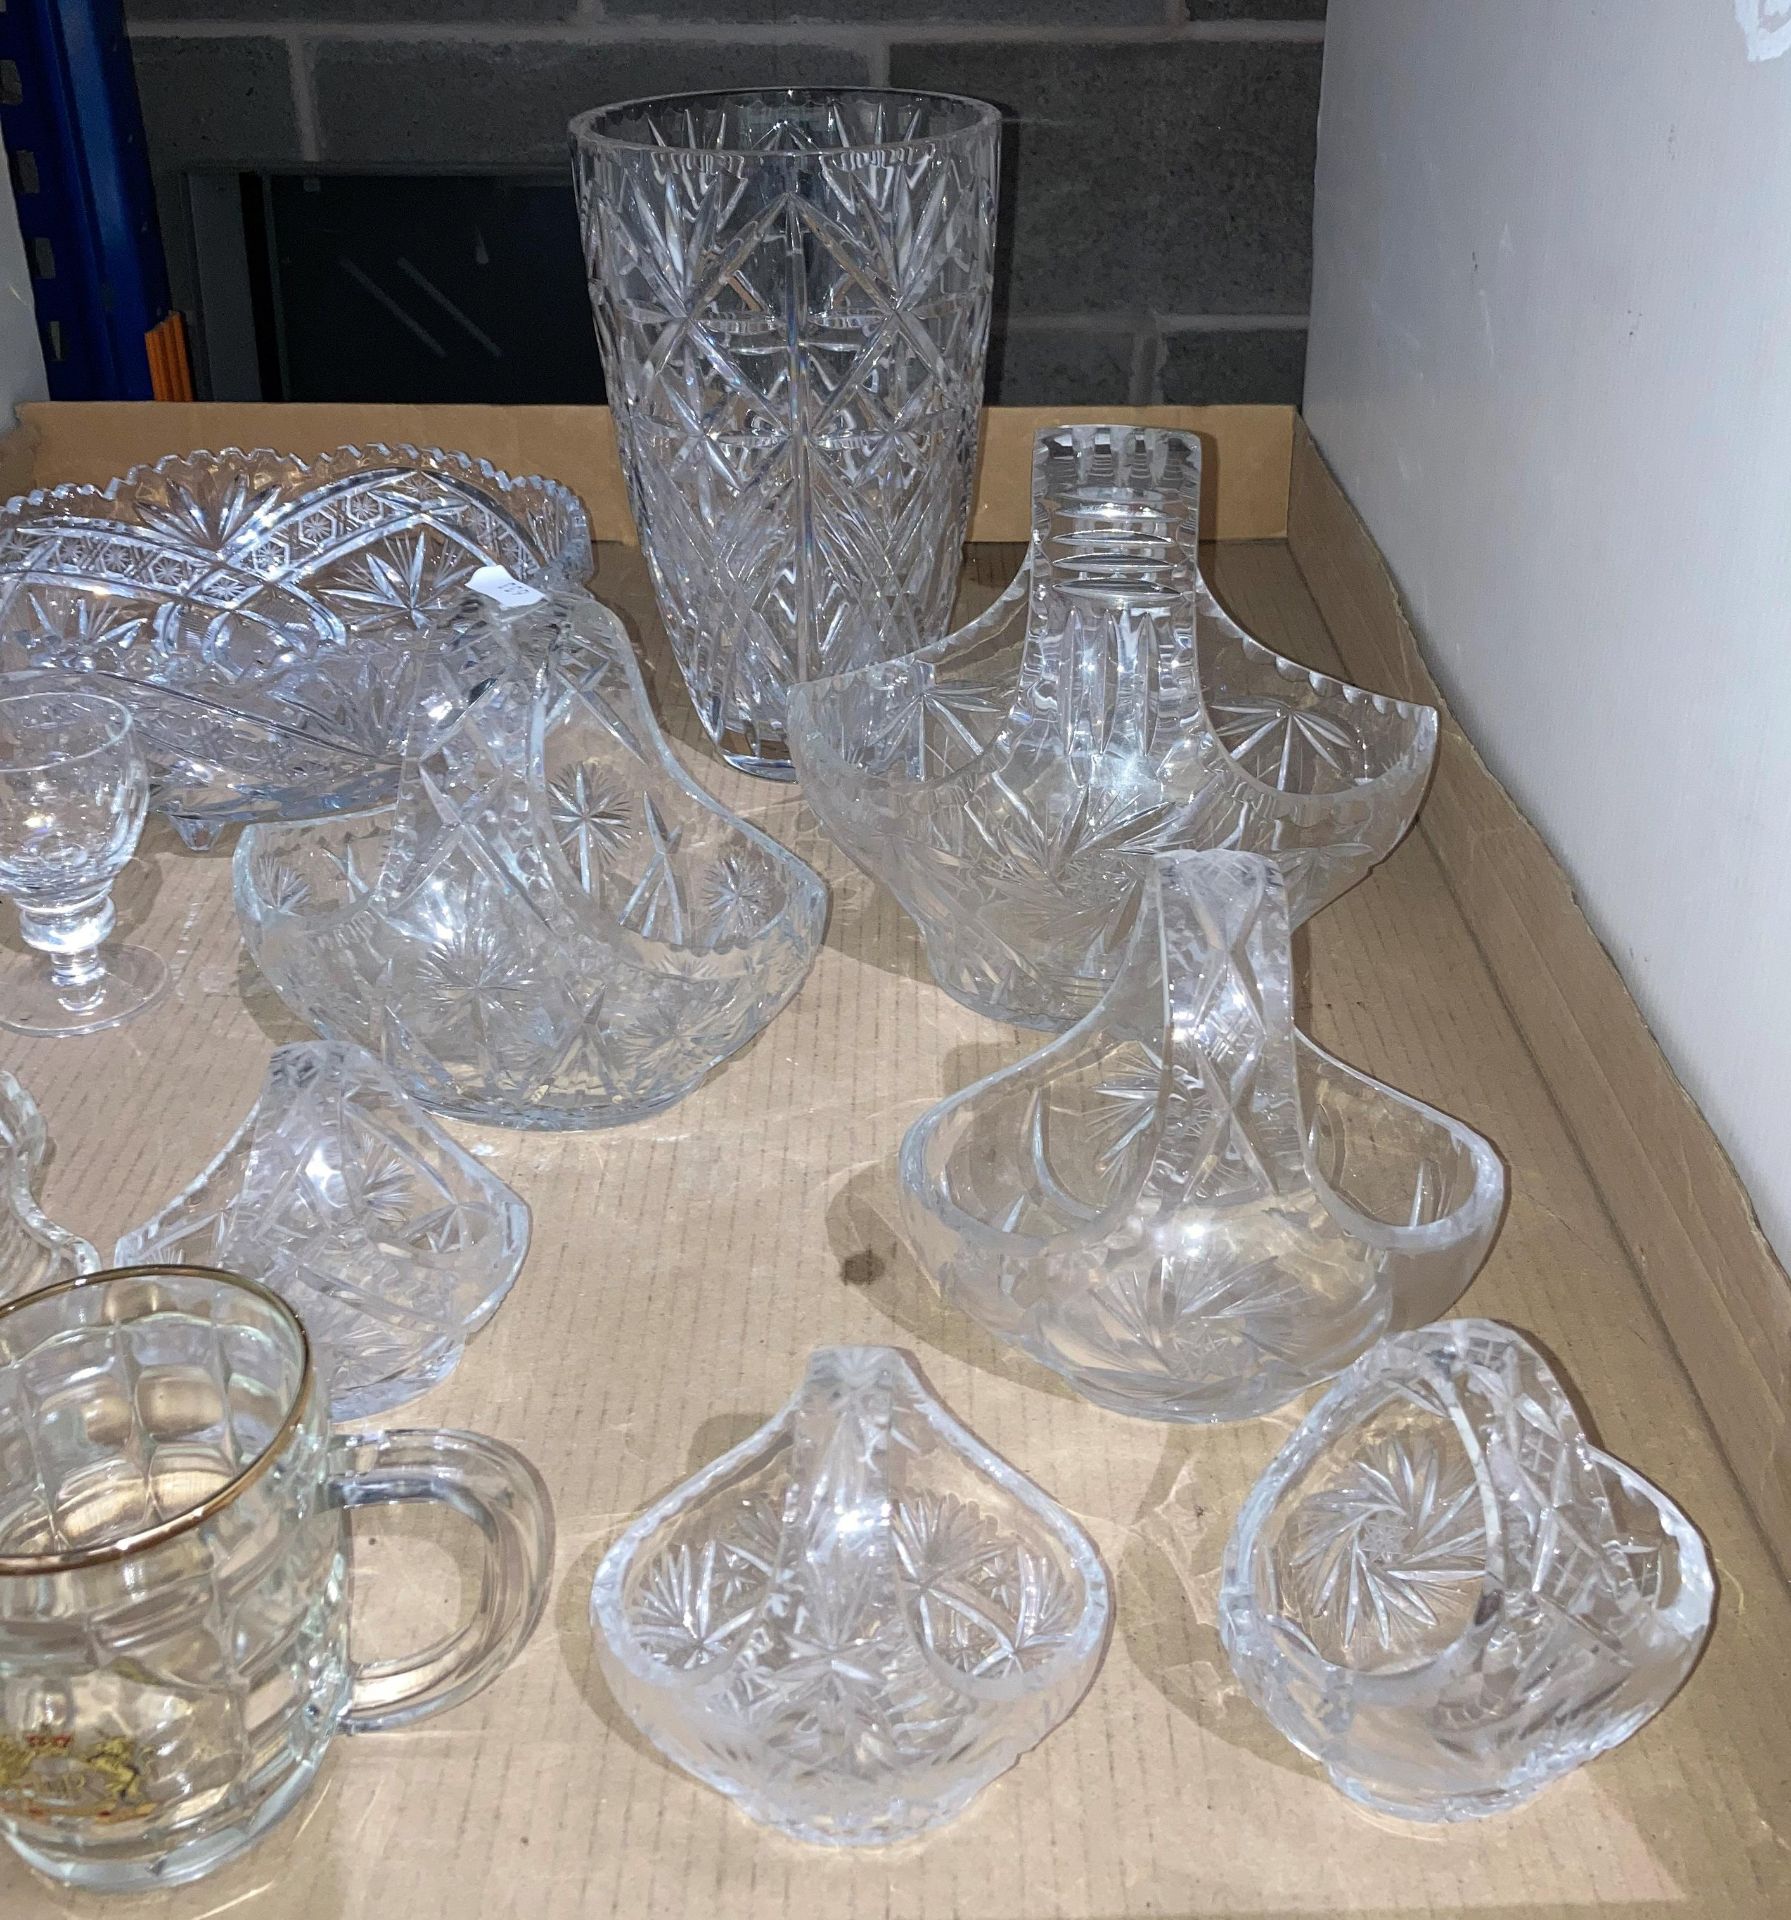 Contents to tray - seventeen assorted pieces of crystal and glassware including a vase, bowl, - Image 3 of 3